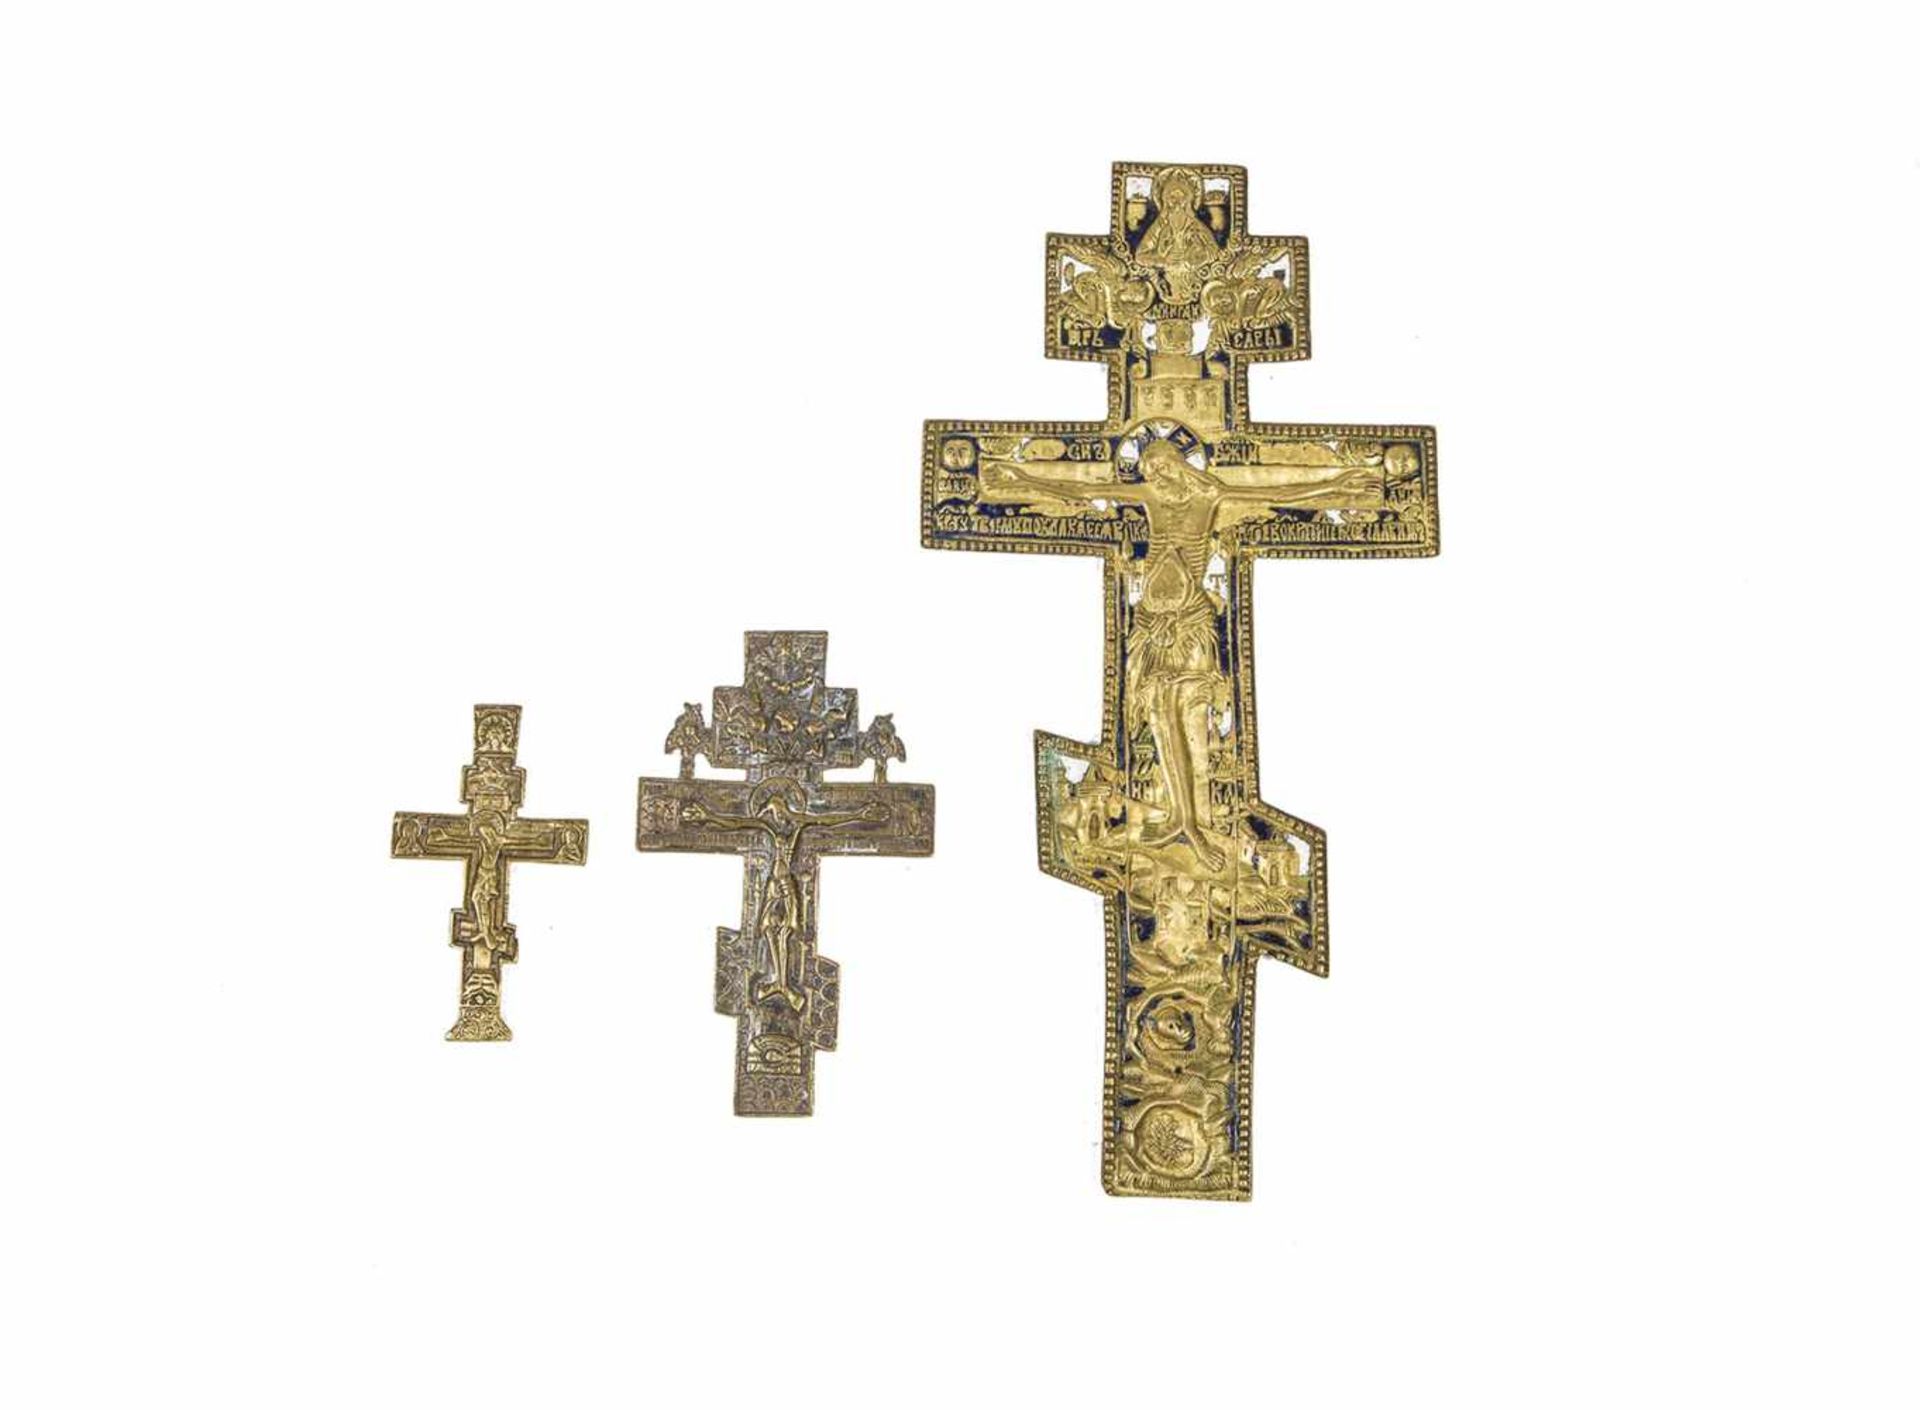 Thee brass crosses. Russia, 18th/19th century. Cast in relief. Large cross with blue andwhite enamel